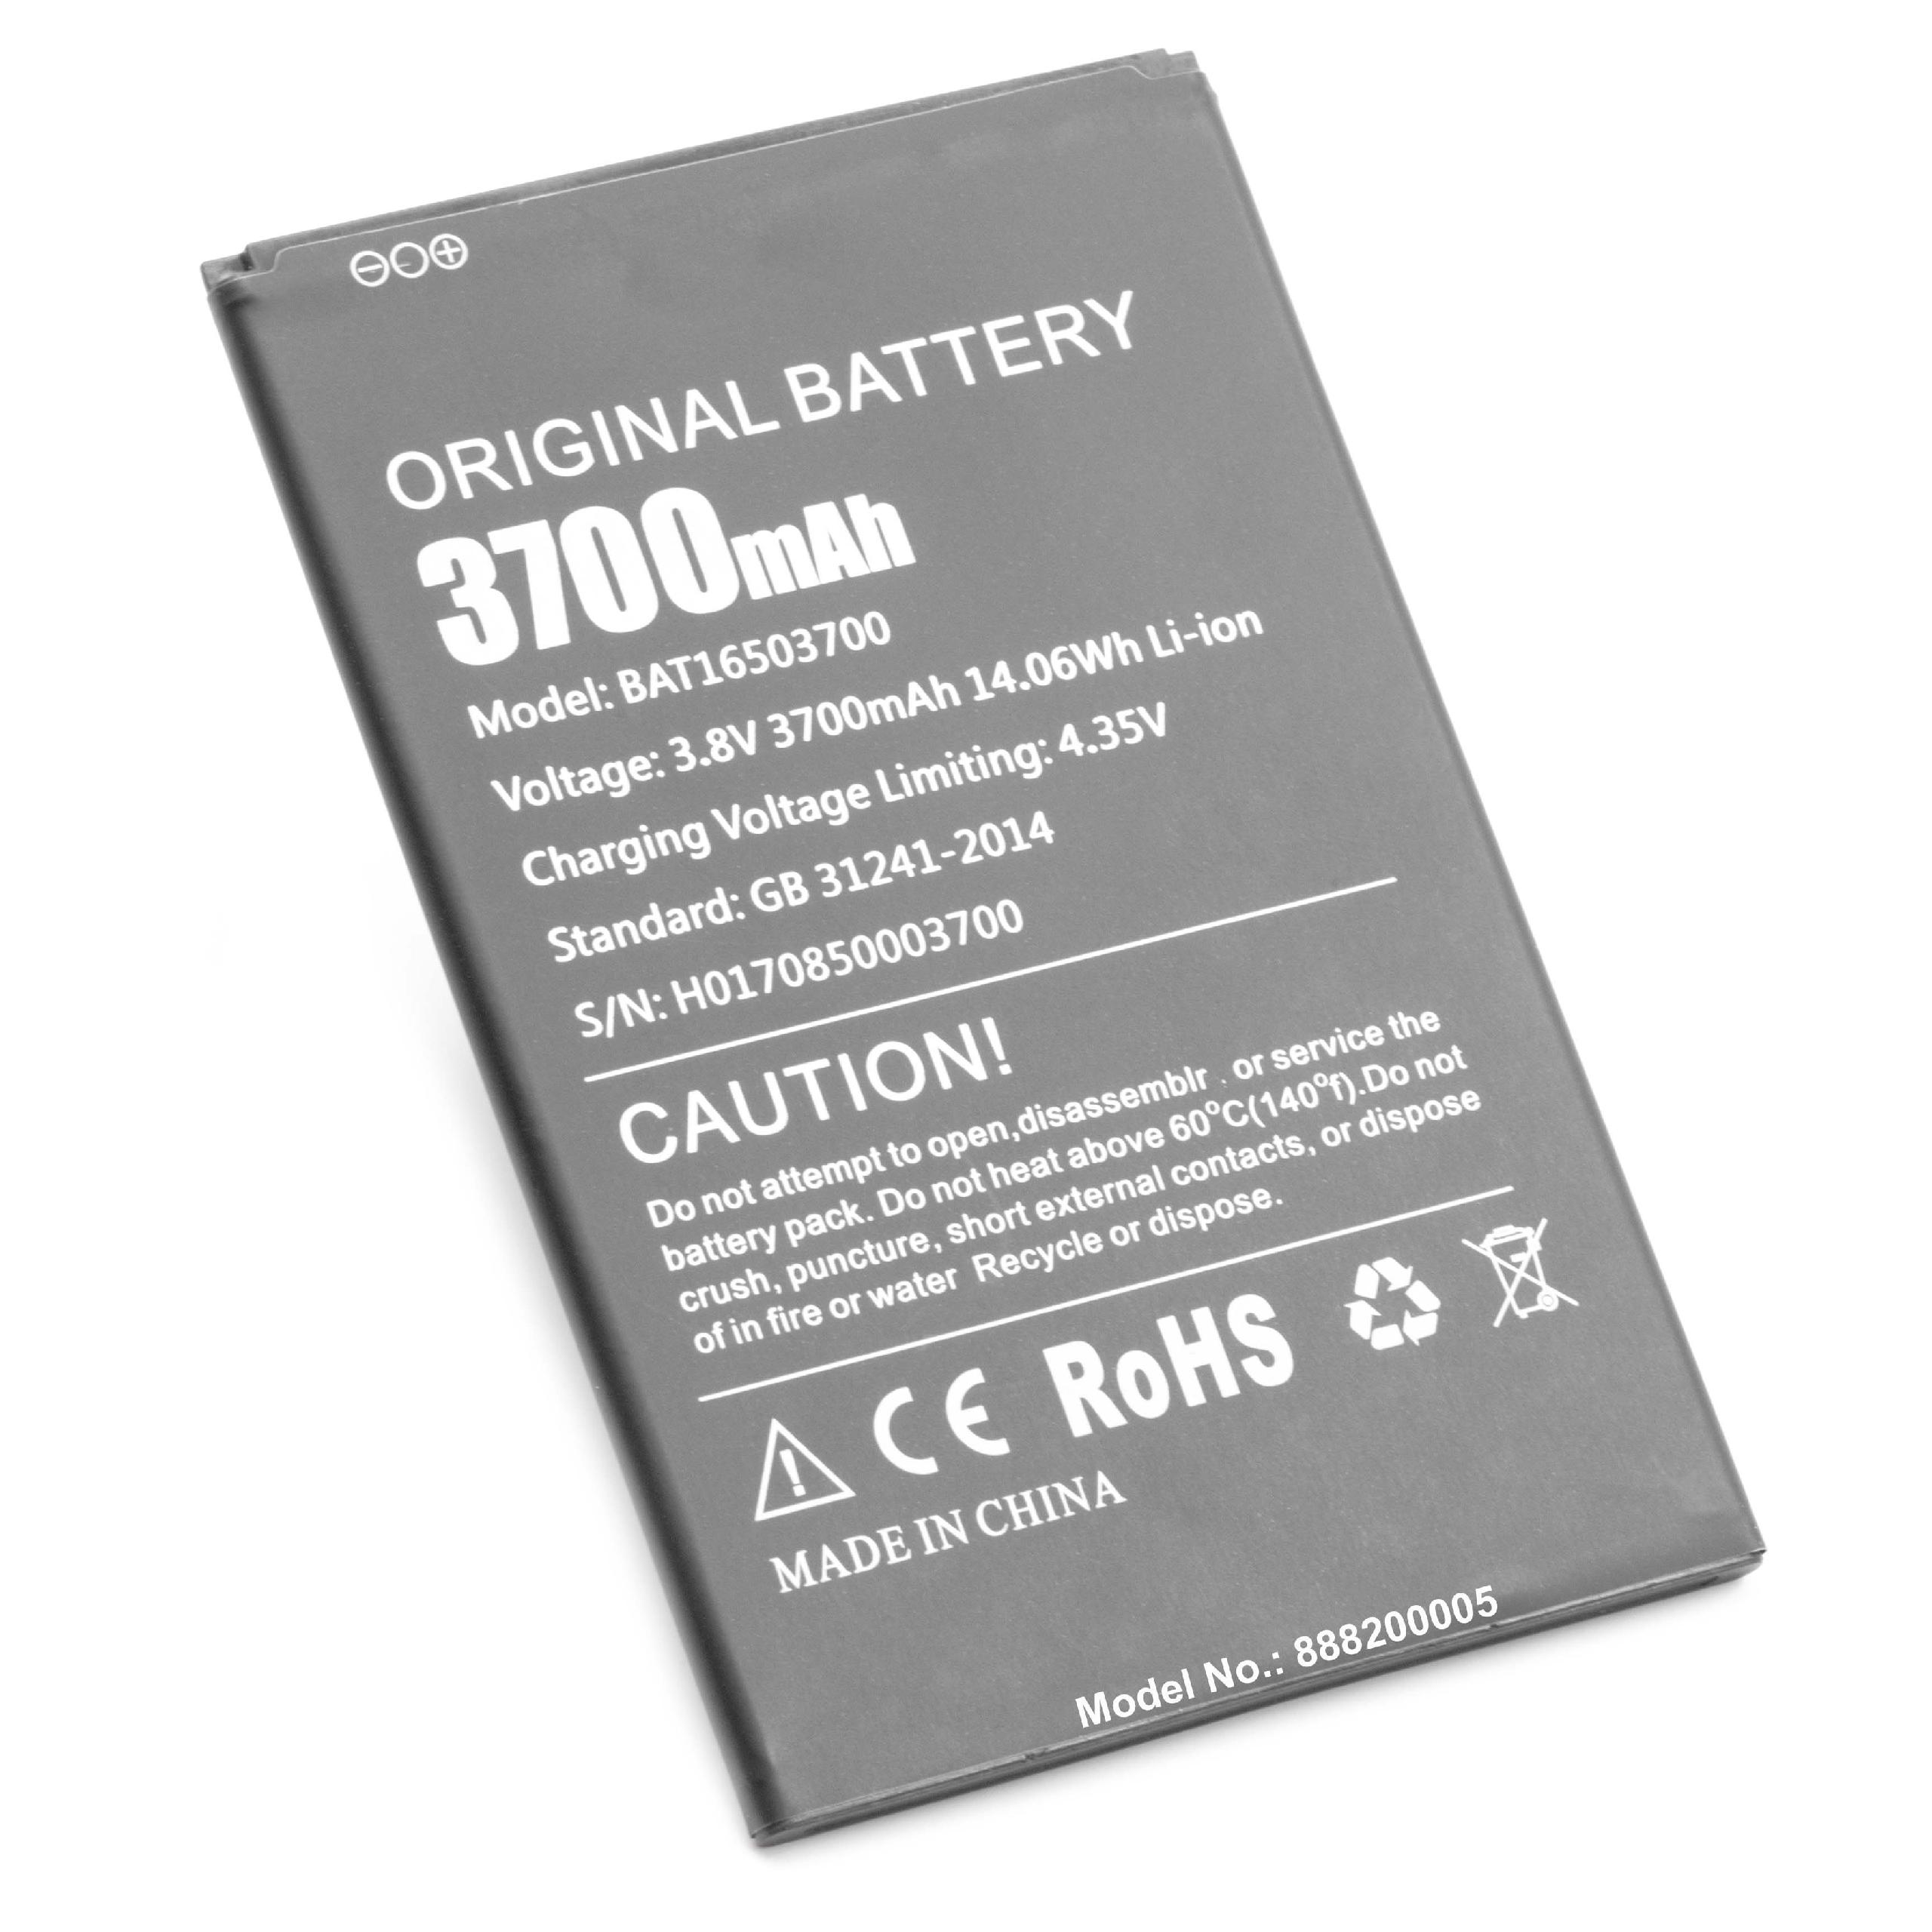 Mobile Phone Battery Replacement for Doogee BAT16503700 - 3700mAh 3.8V Li-Ion